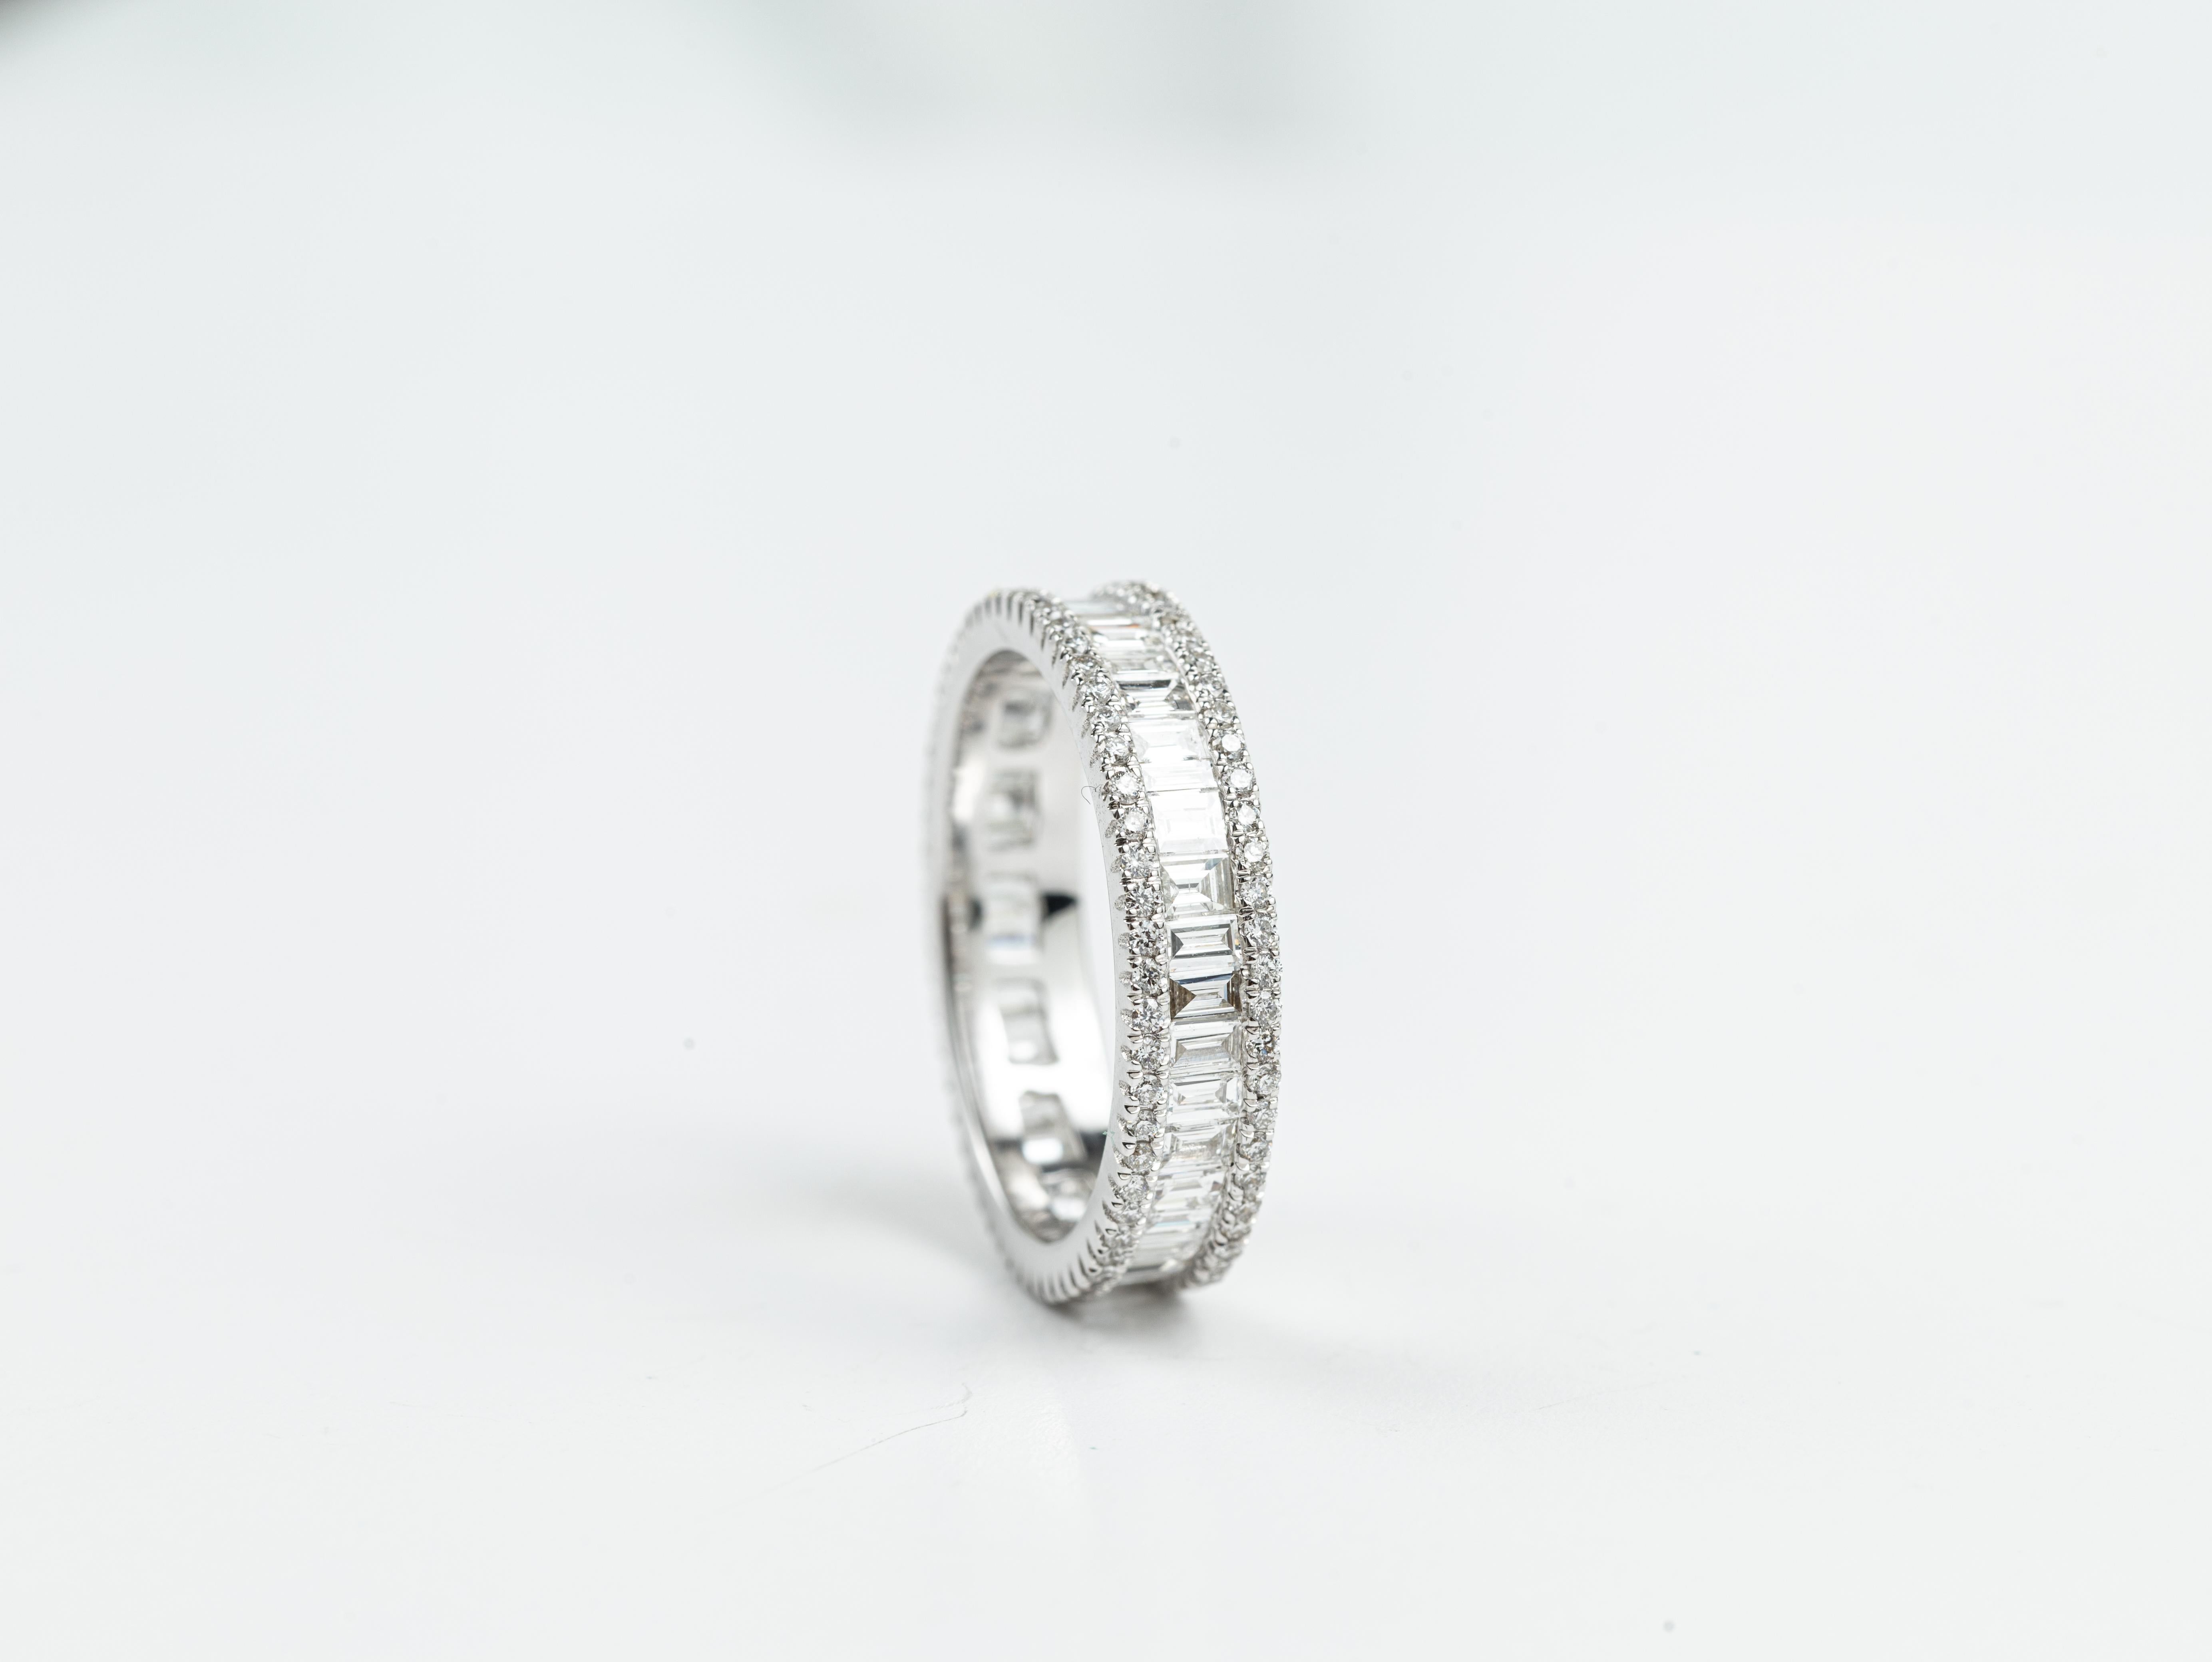 Art Deco Diamond baguette cut ring illusion Setting, 1.1 TCW F G VS Diamond Ring


Available in 18k white gold.

Same design can be made also with other custom gemstones per request.

Product details:

- Solid gold

- 1.65 carat diamond ( F, VS )

-